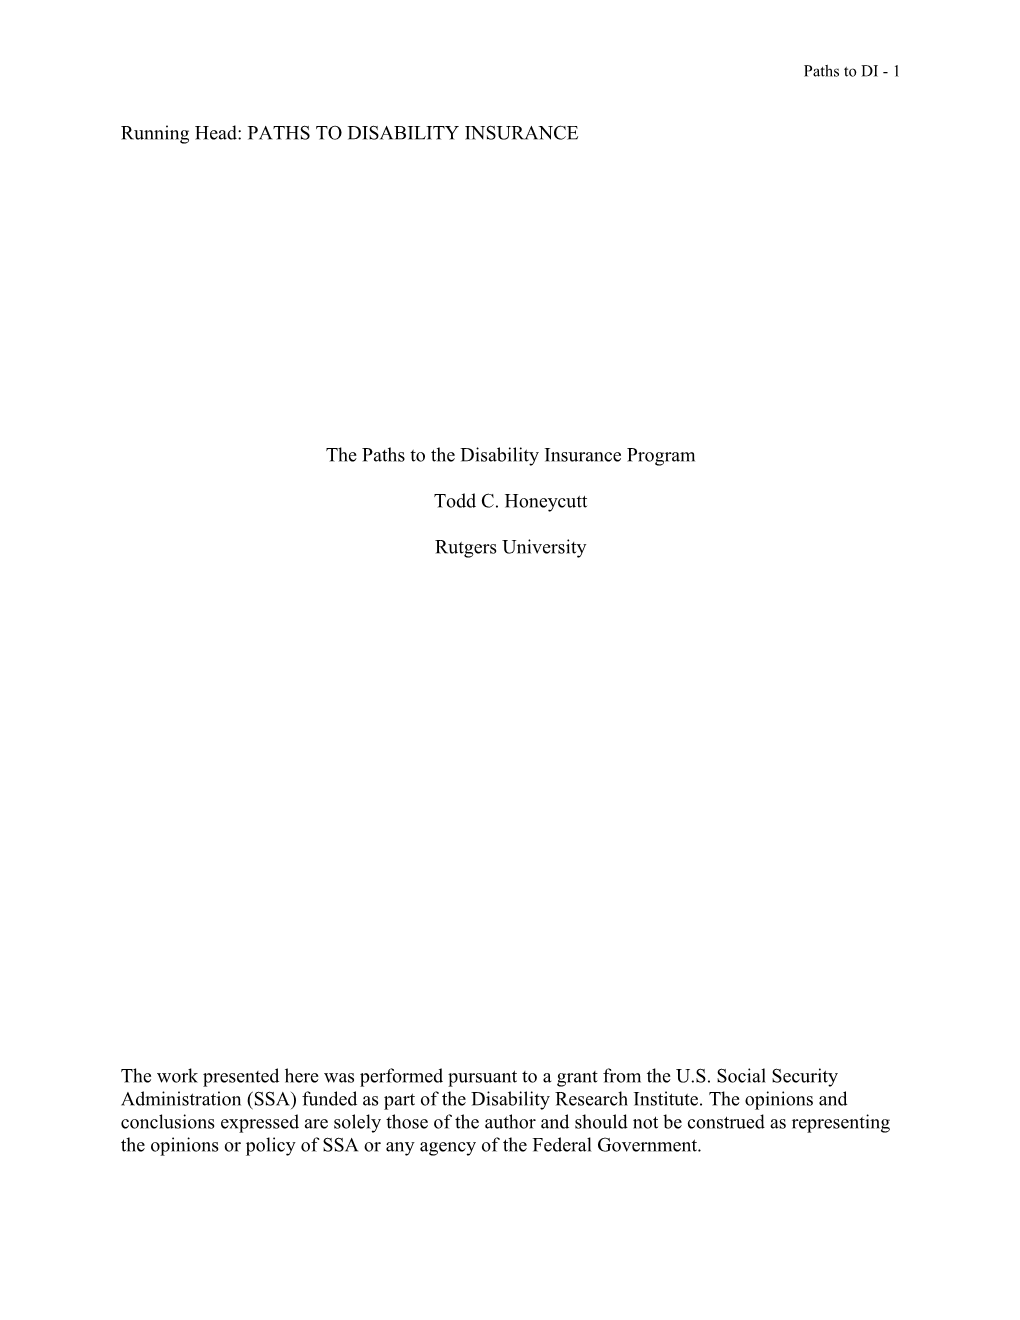 Paths to DI- Final Report